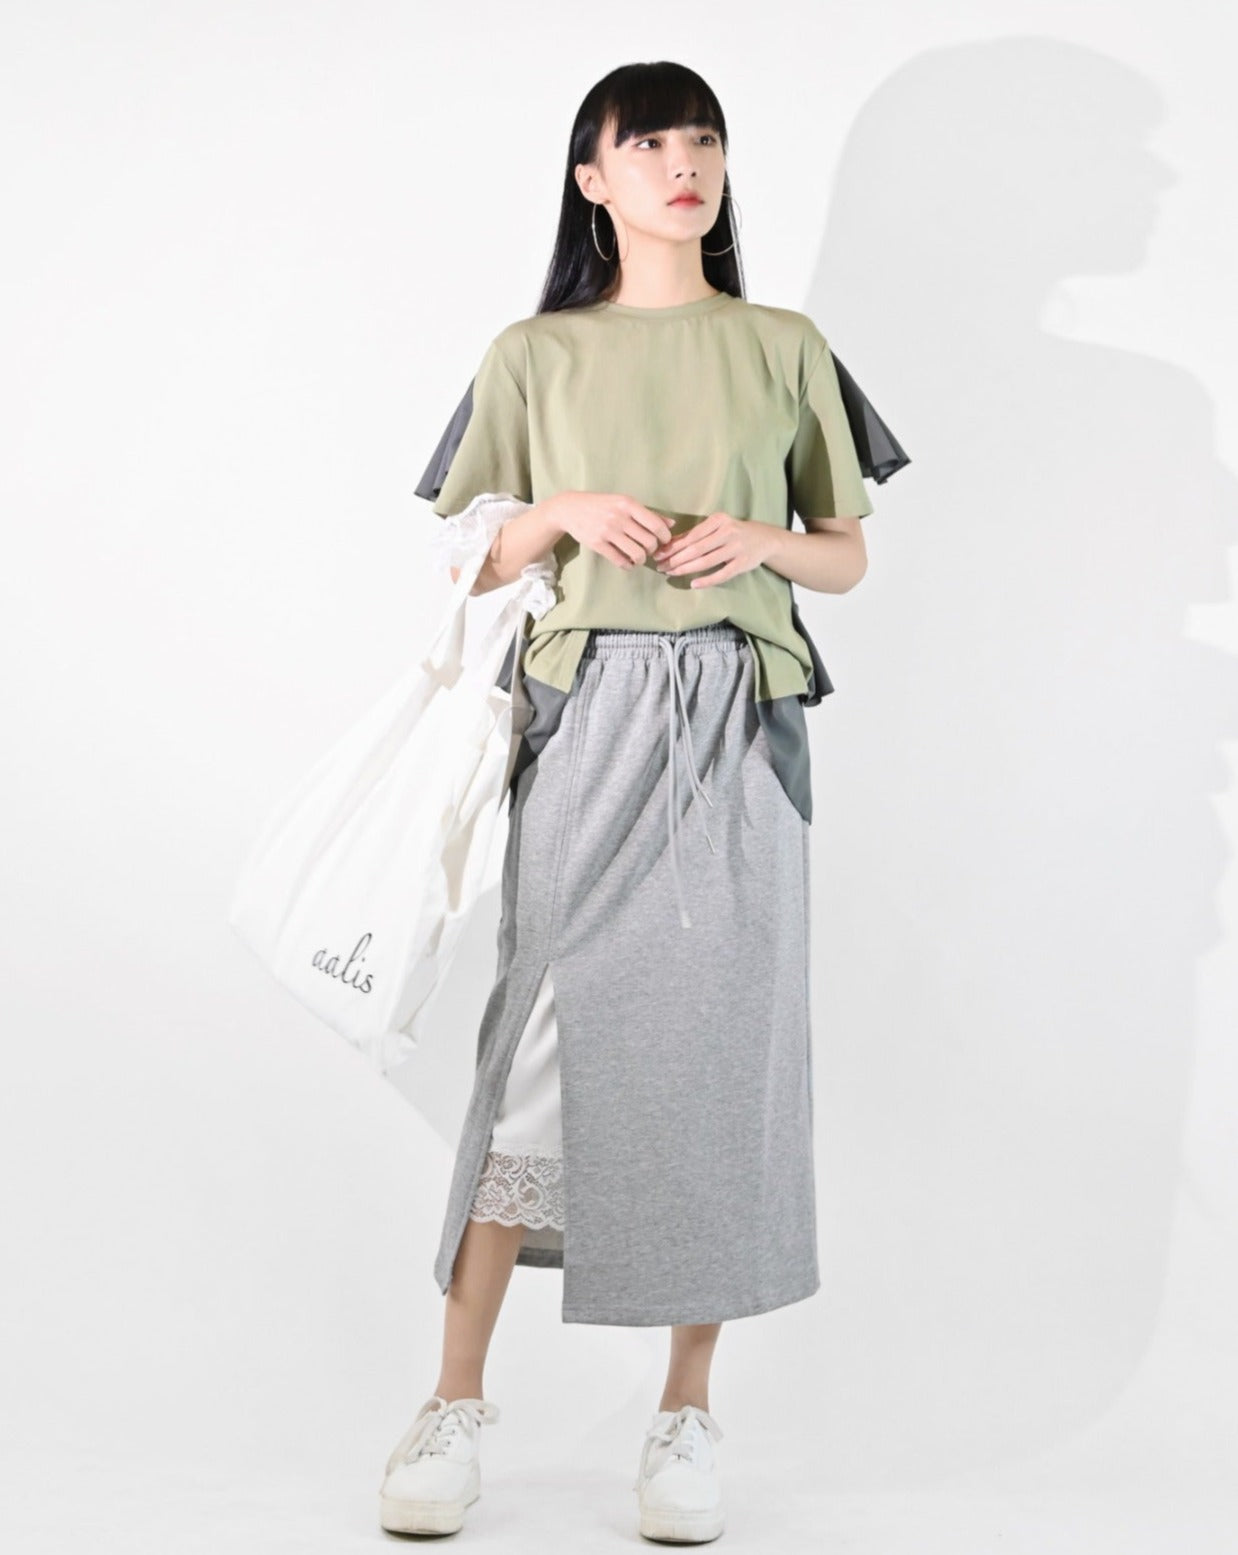 Load image into Gallery viewer, aalis ROMINA front split skirt with lining (Heather grey)
